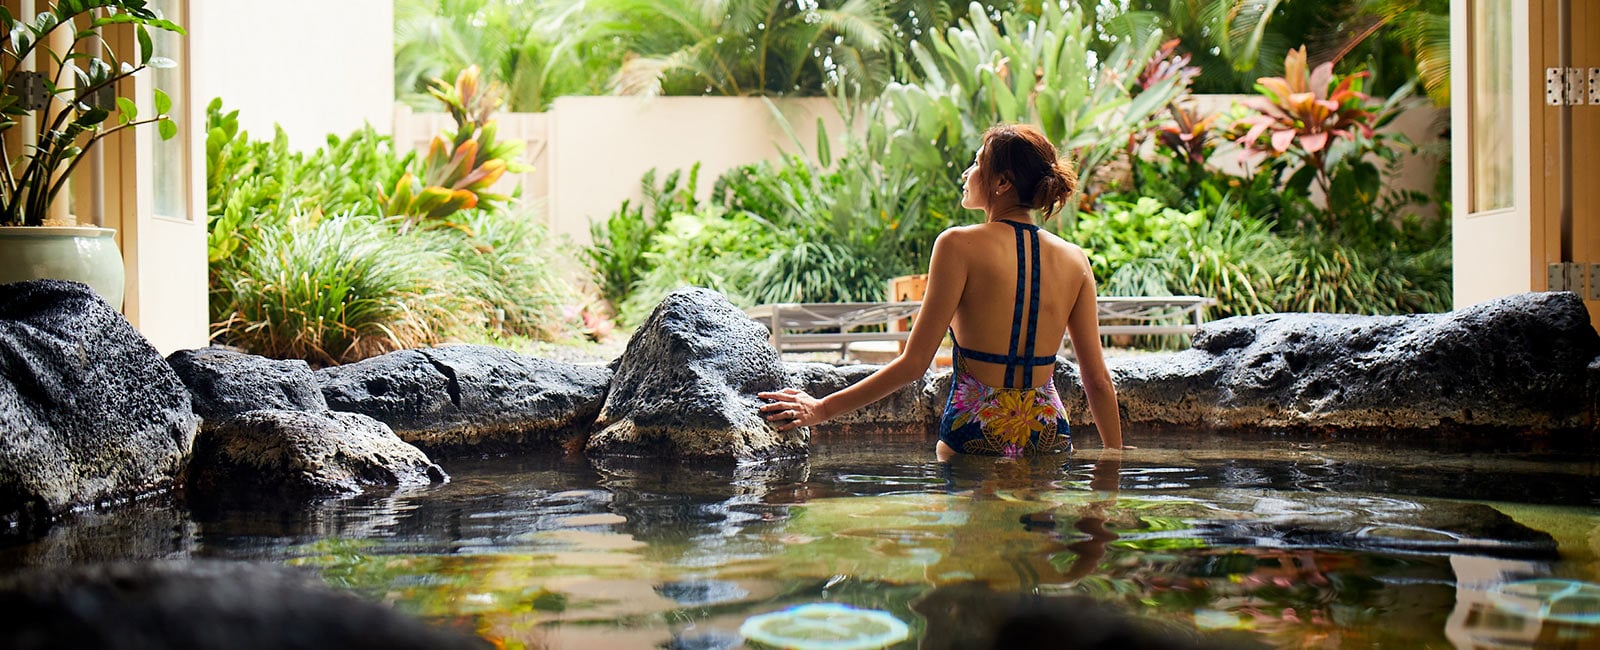 Enjoy a spa vacation in Hawaii with Hilton Grand Vacations